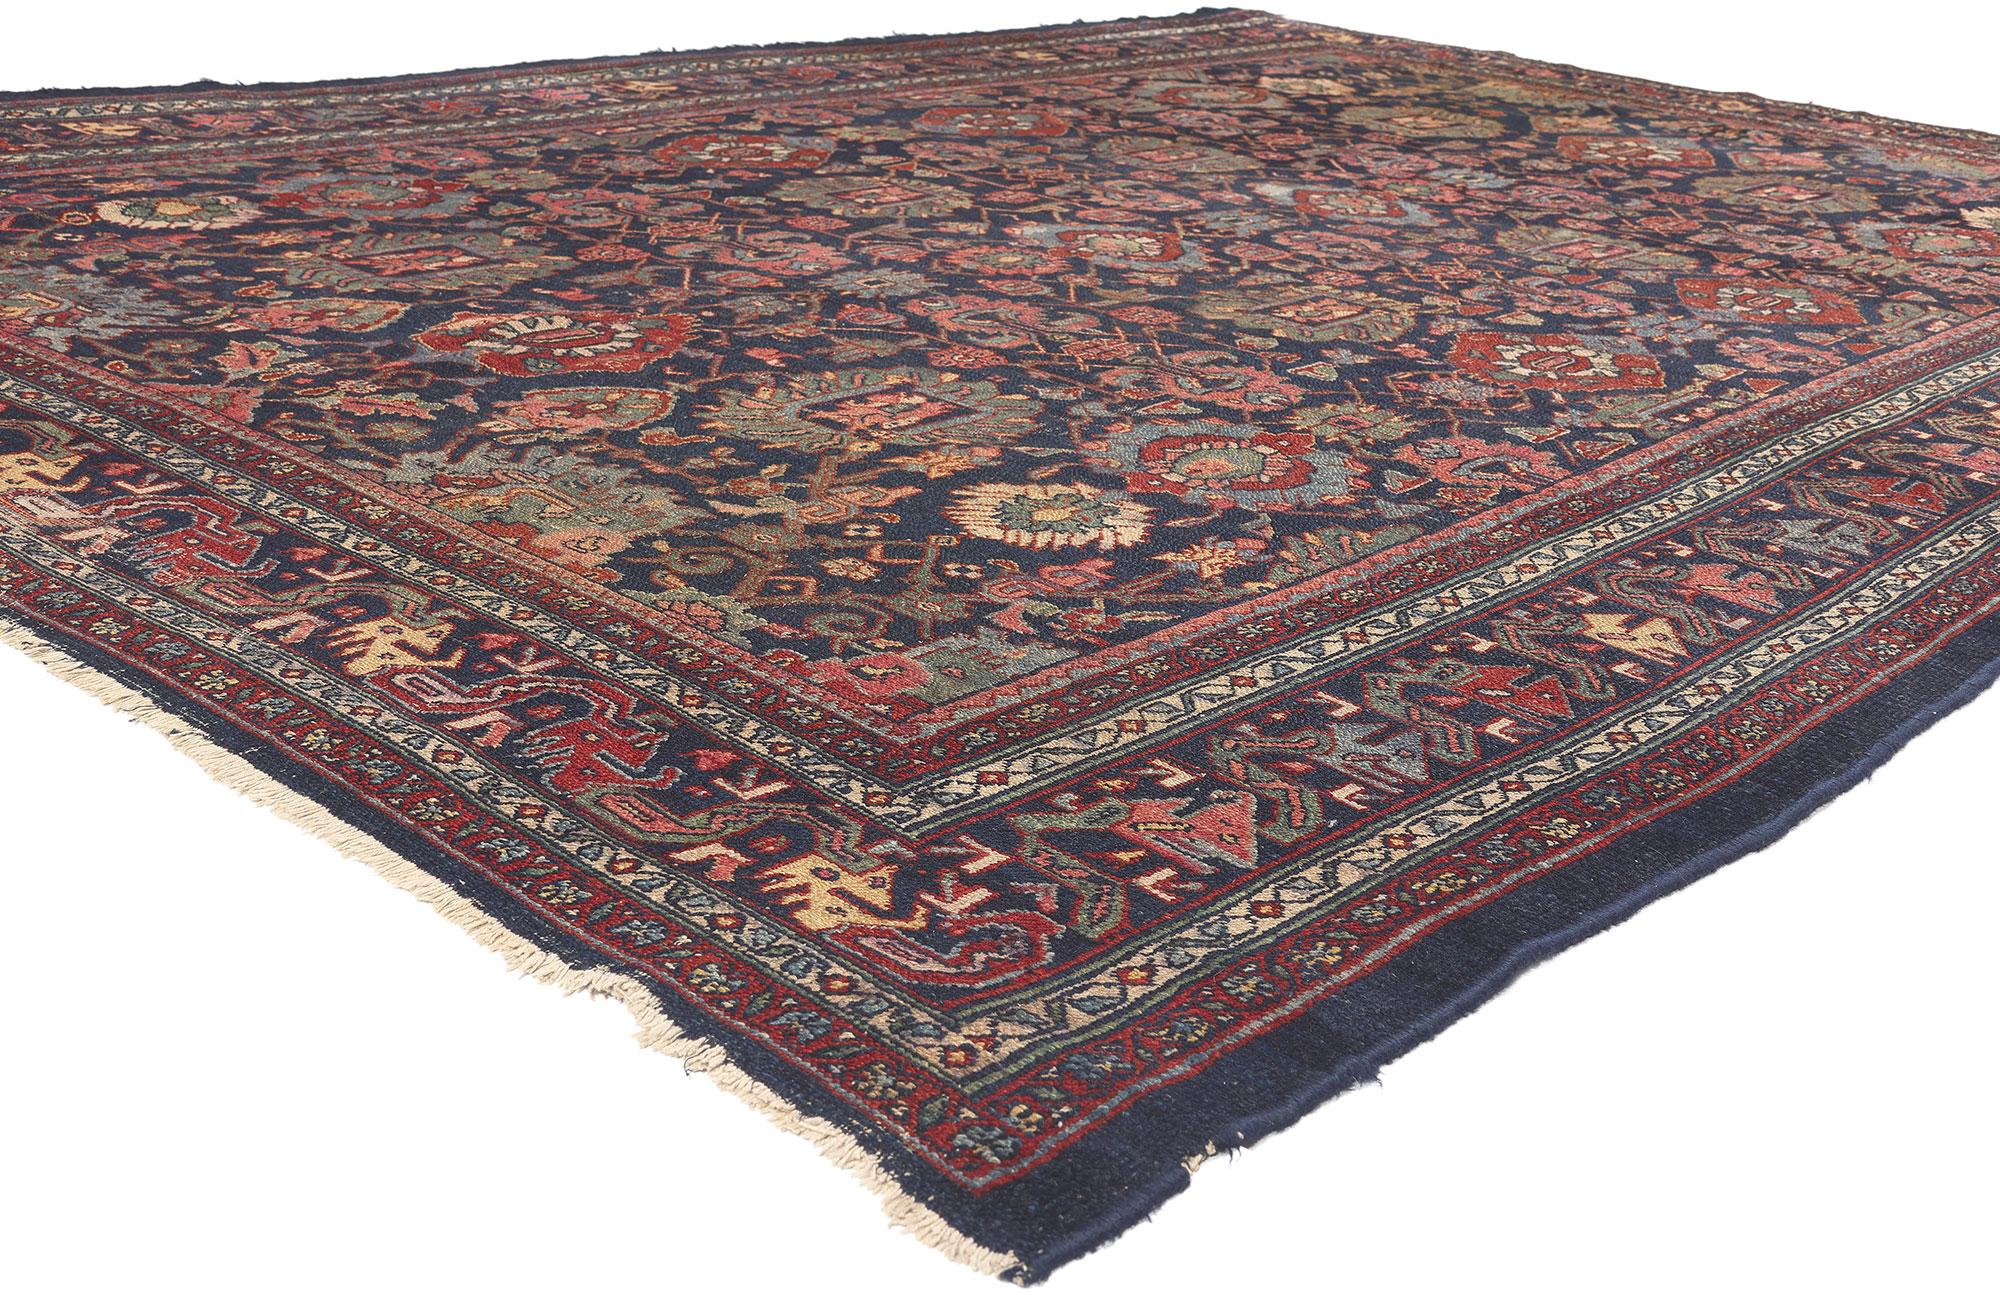 77160 Late 19th Century Antique Persian Bibikabad Rug, 08’00 x 11’09.
Traditional elegance meets rustic sensibility in this hand knotted wool antique Persian Bibikabad rug. The captivating botanical design and classic color palette woven into this